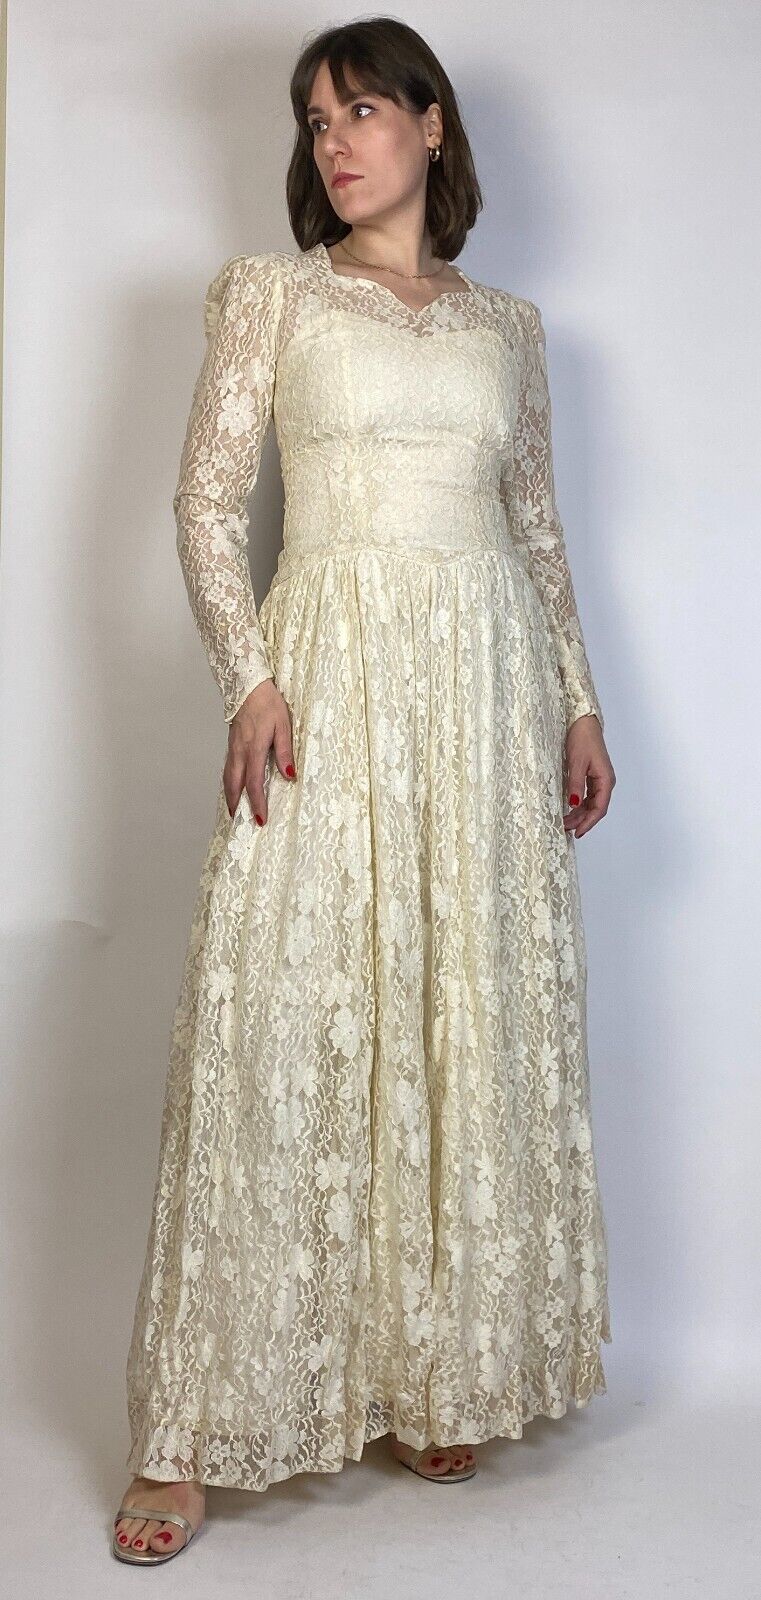 Vintage 1940s Cream LACE Sweetheart Neckline Full Length WEDDING GOWN! Size 6